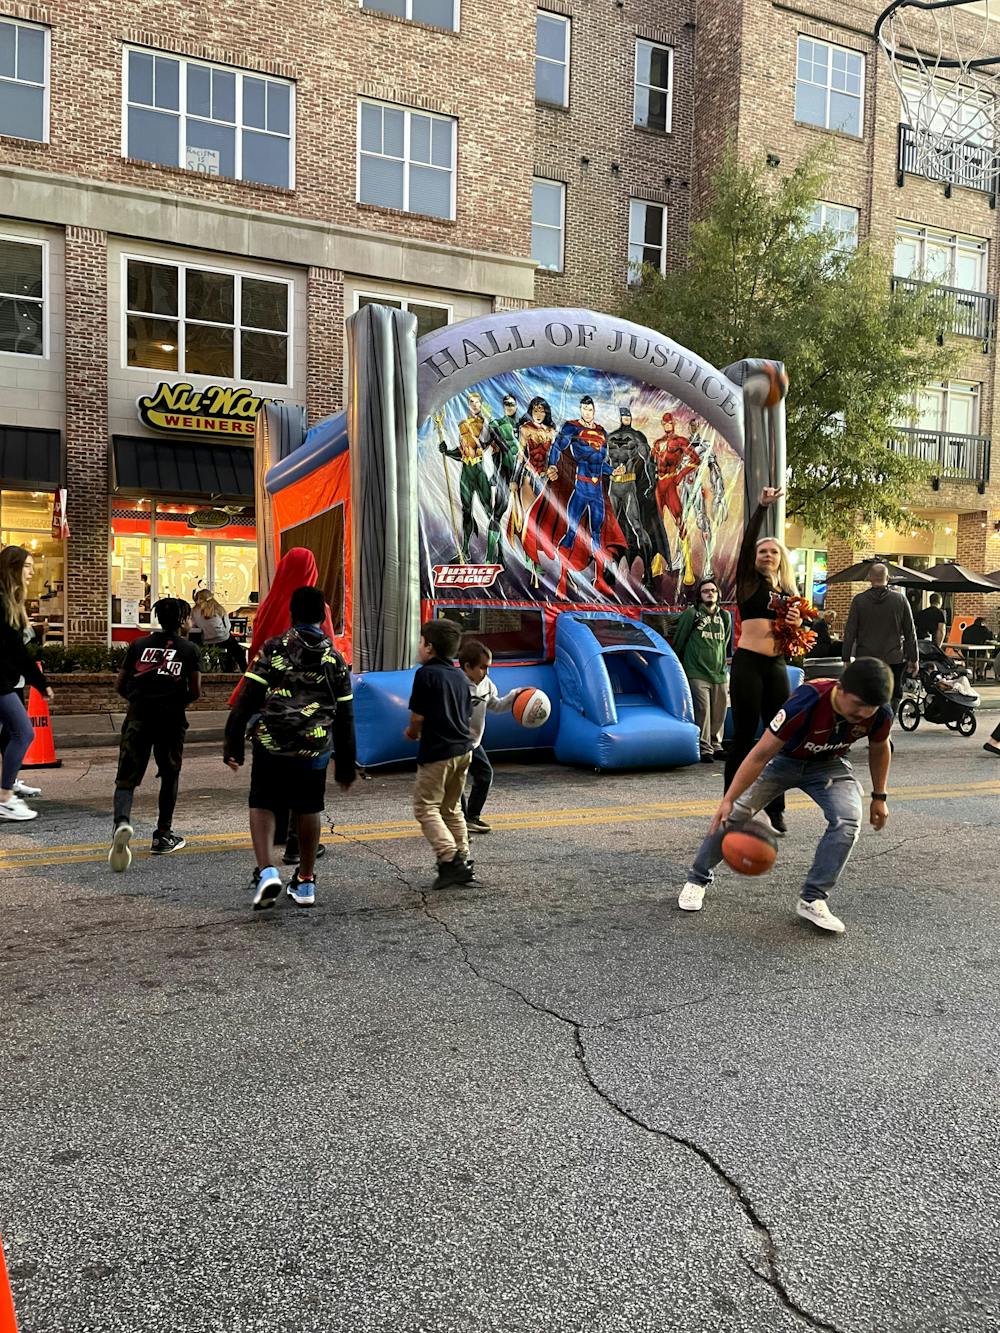 <p>Kids from the Macon community and Mercer students came together, played basketball and had fun in the bouncy house.</p>